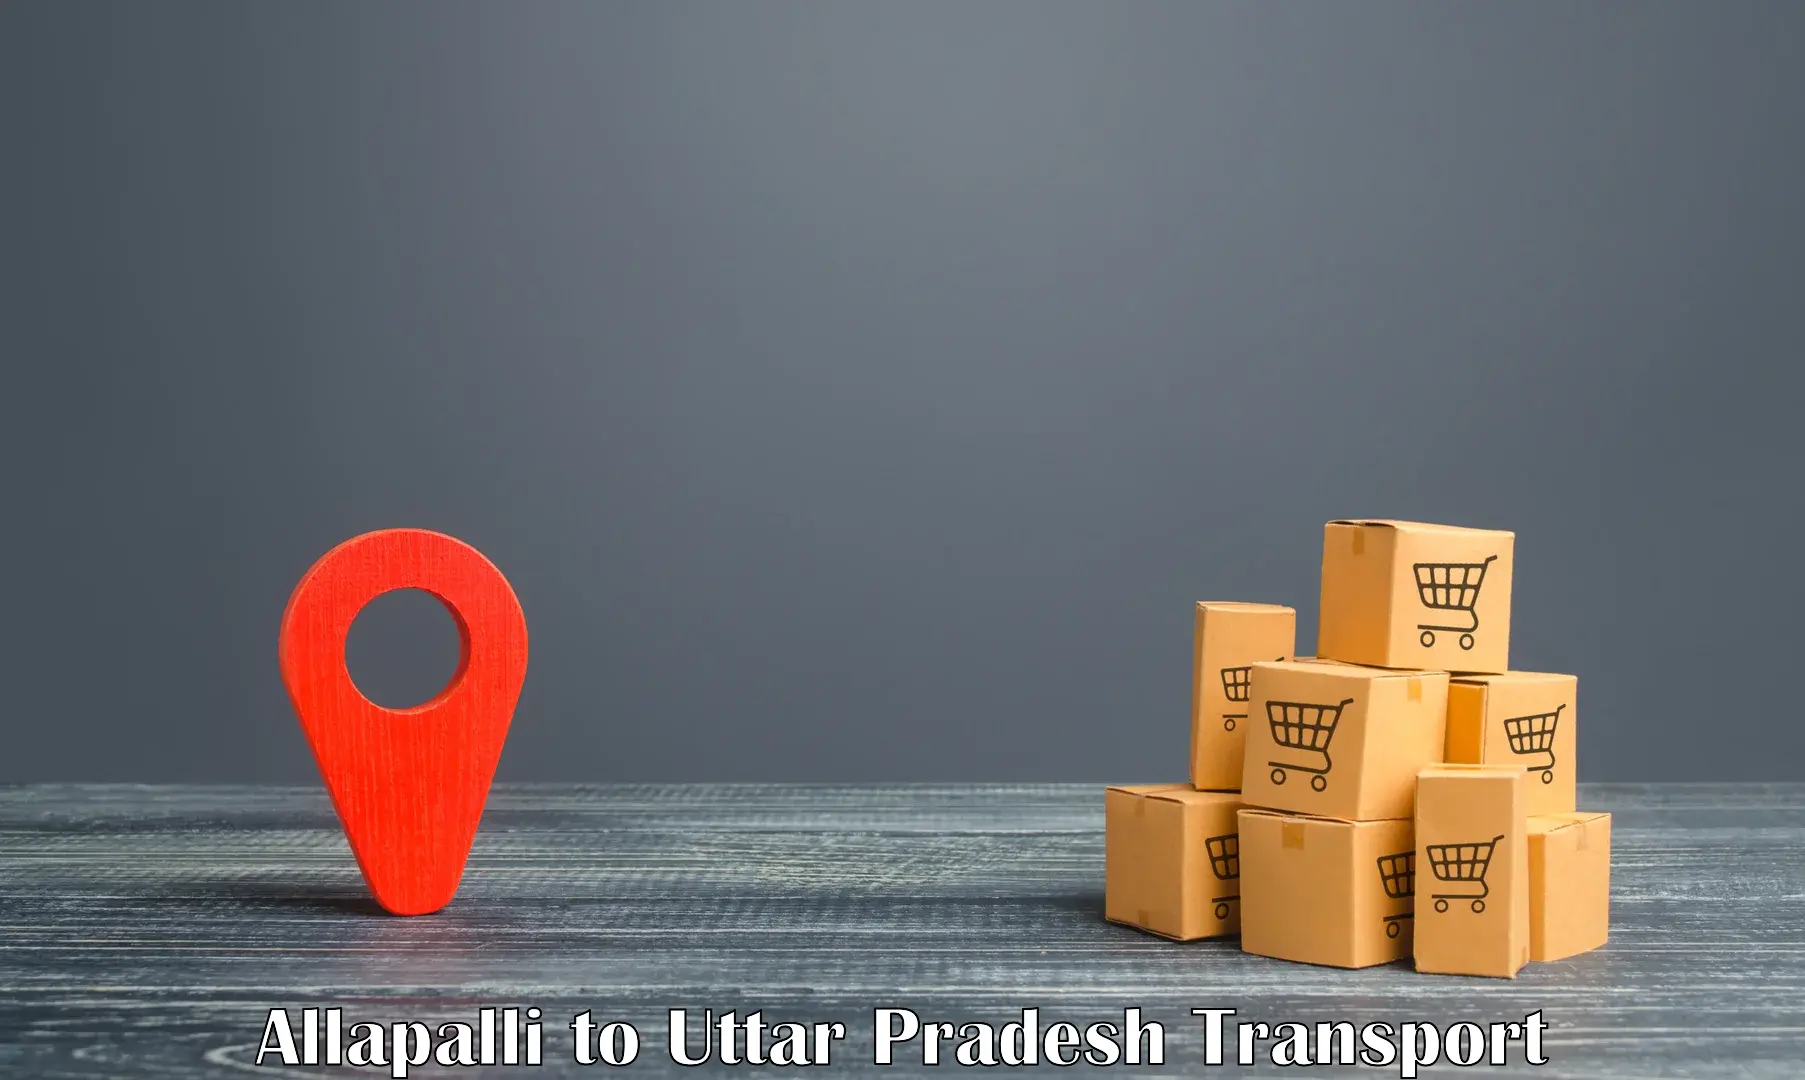 Shipping services Allapalli to Kanpur